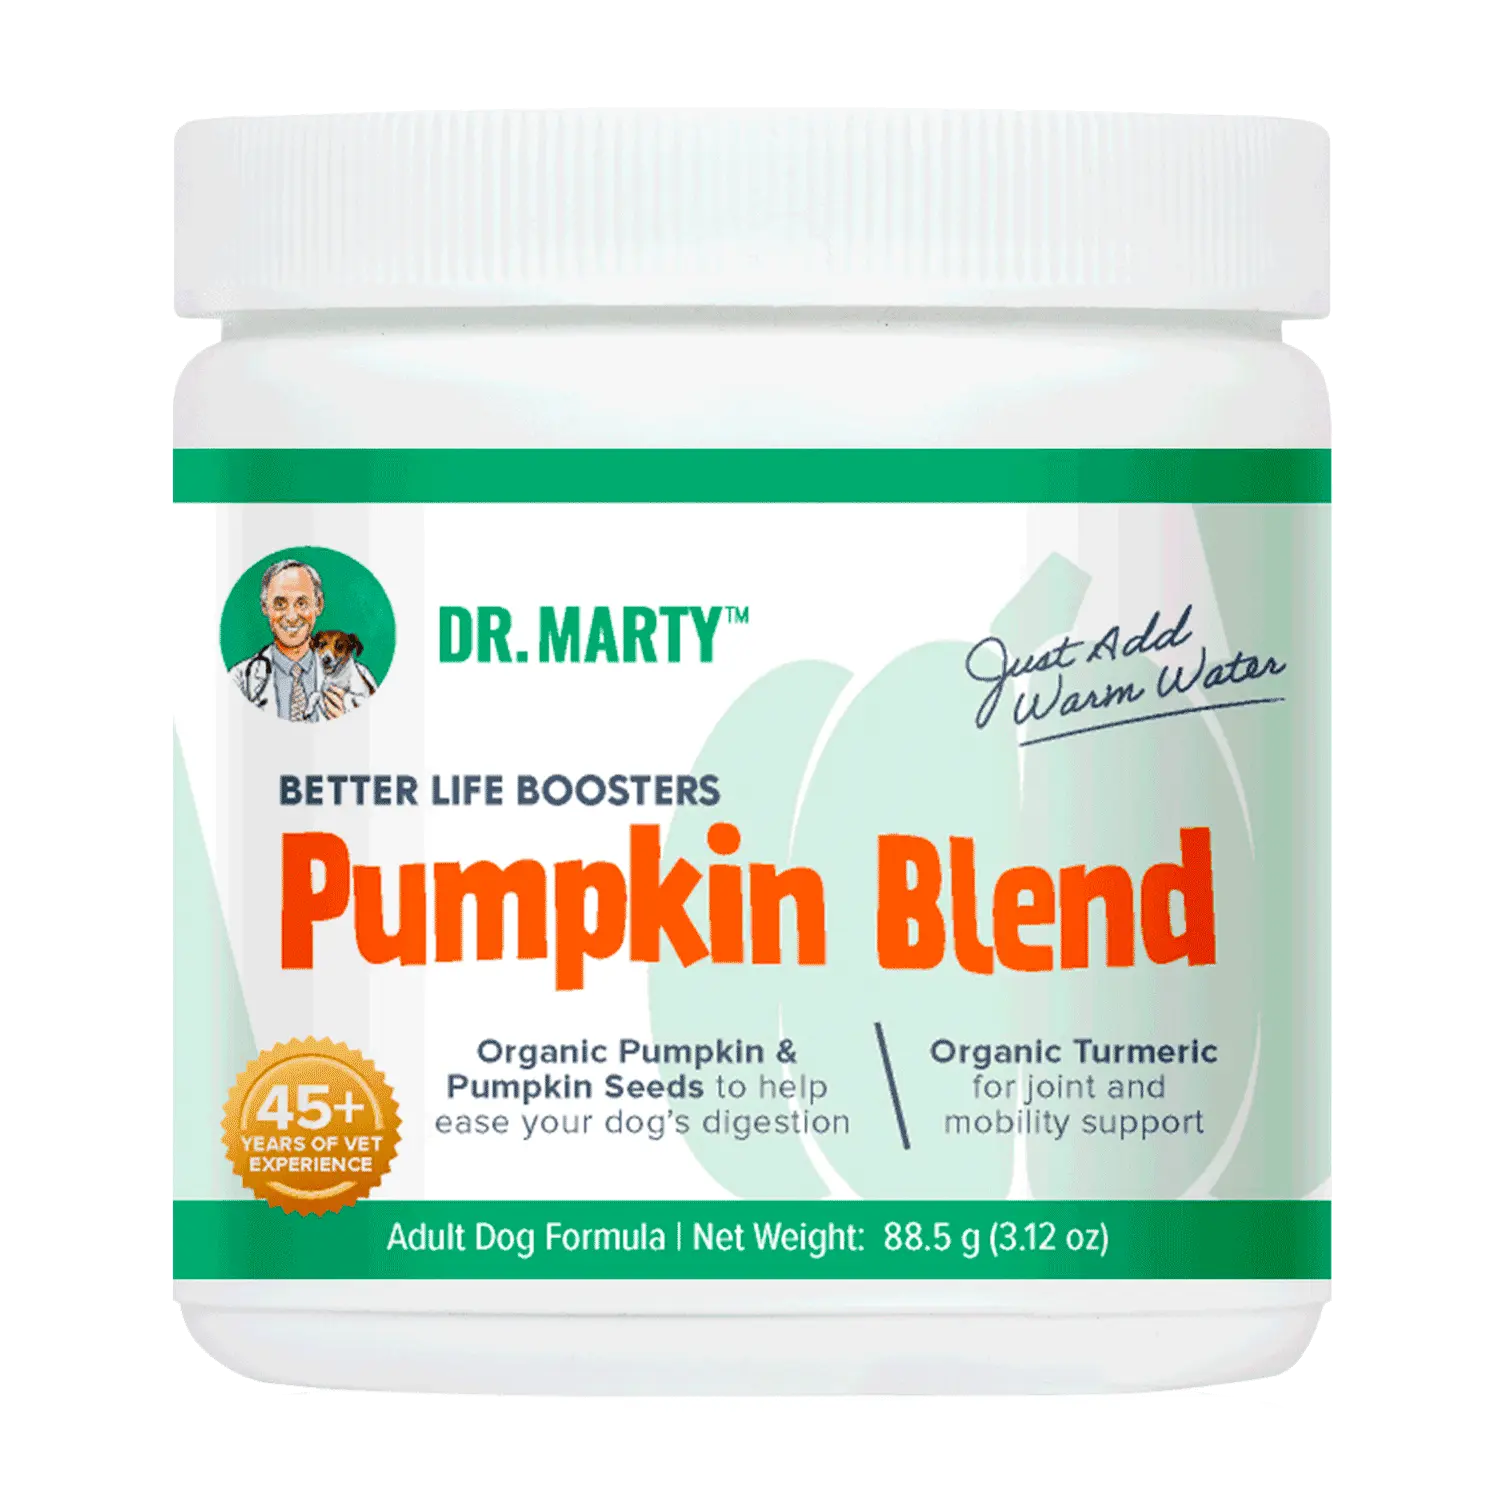 Dr. Marty Pumpkin Blend Better Life Boosters Powdered Supplement for Dogs Dr. Marty